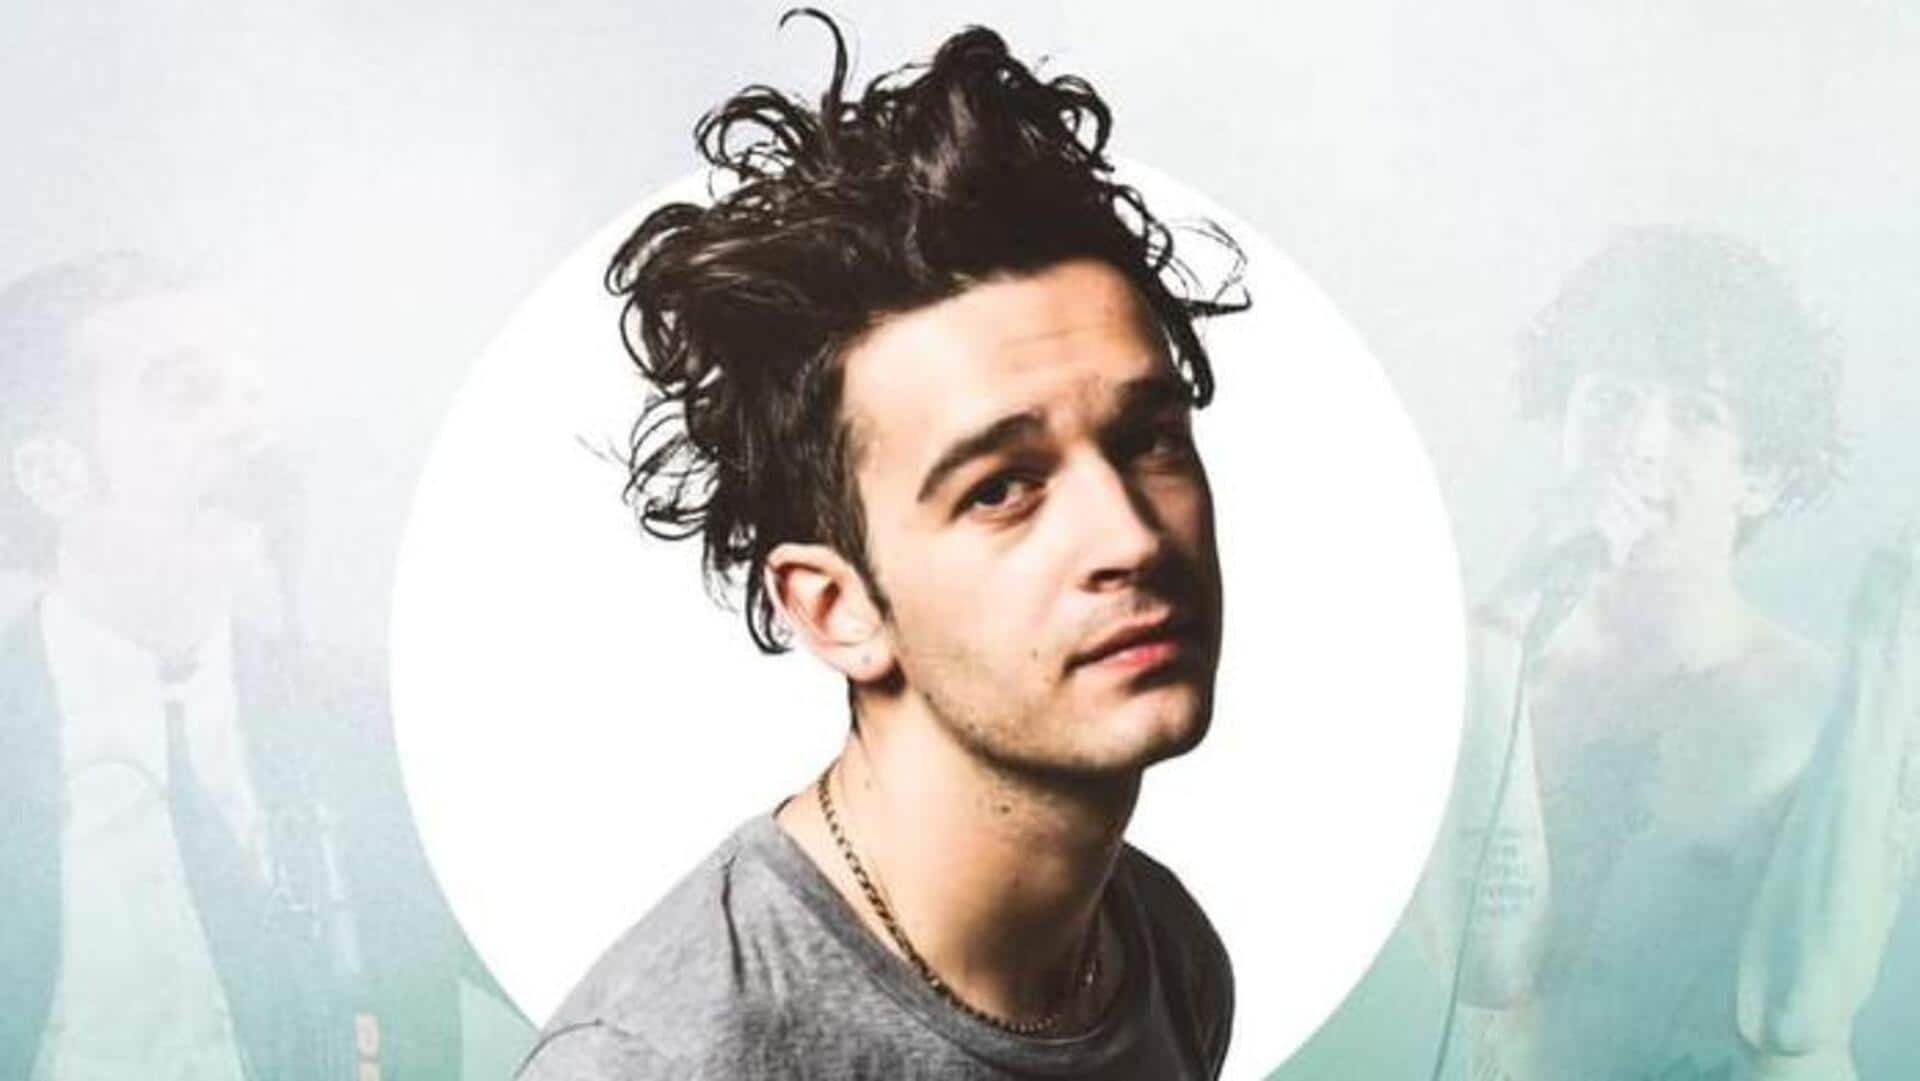 Matty Healy's Malaysian concert canceled over onstage kiss